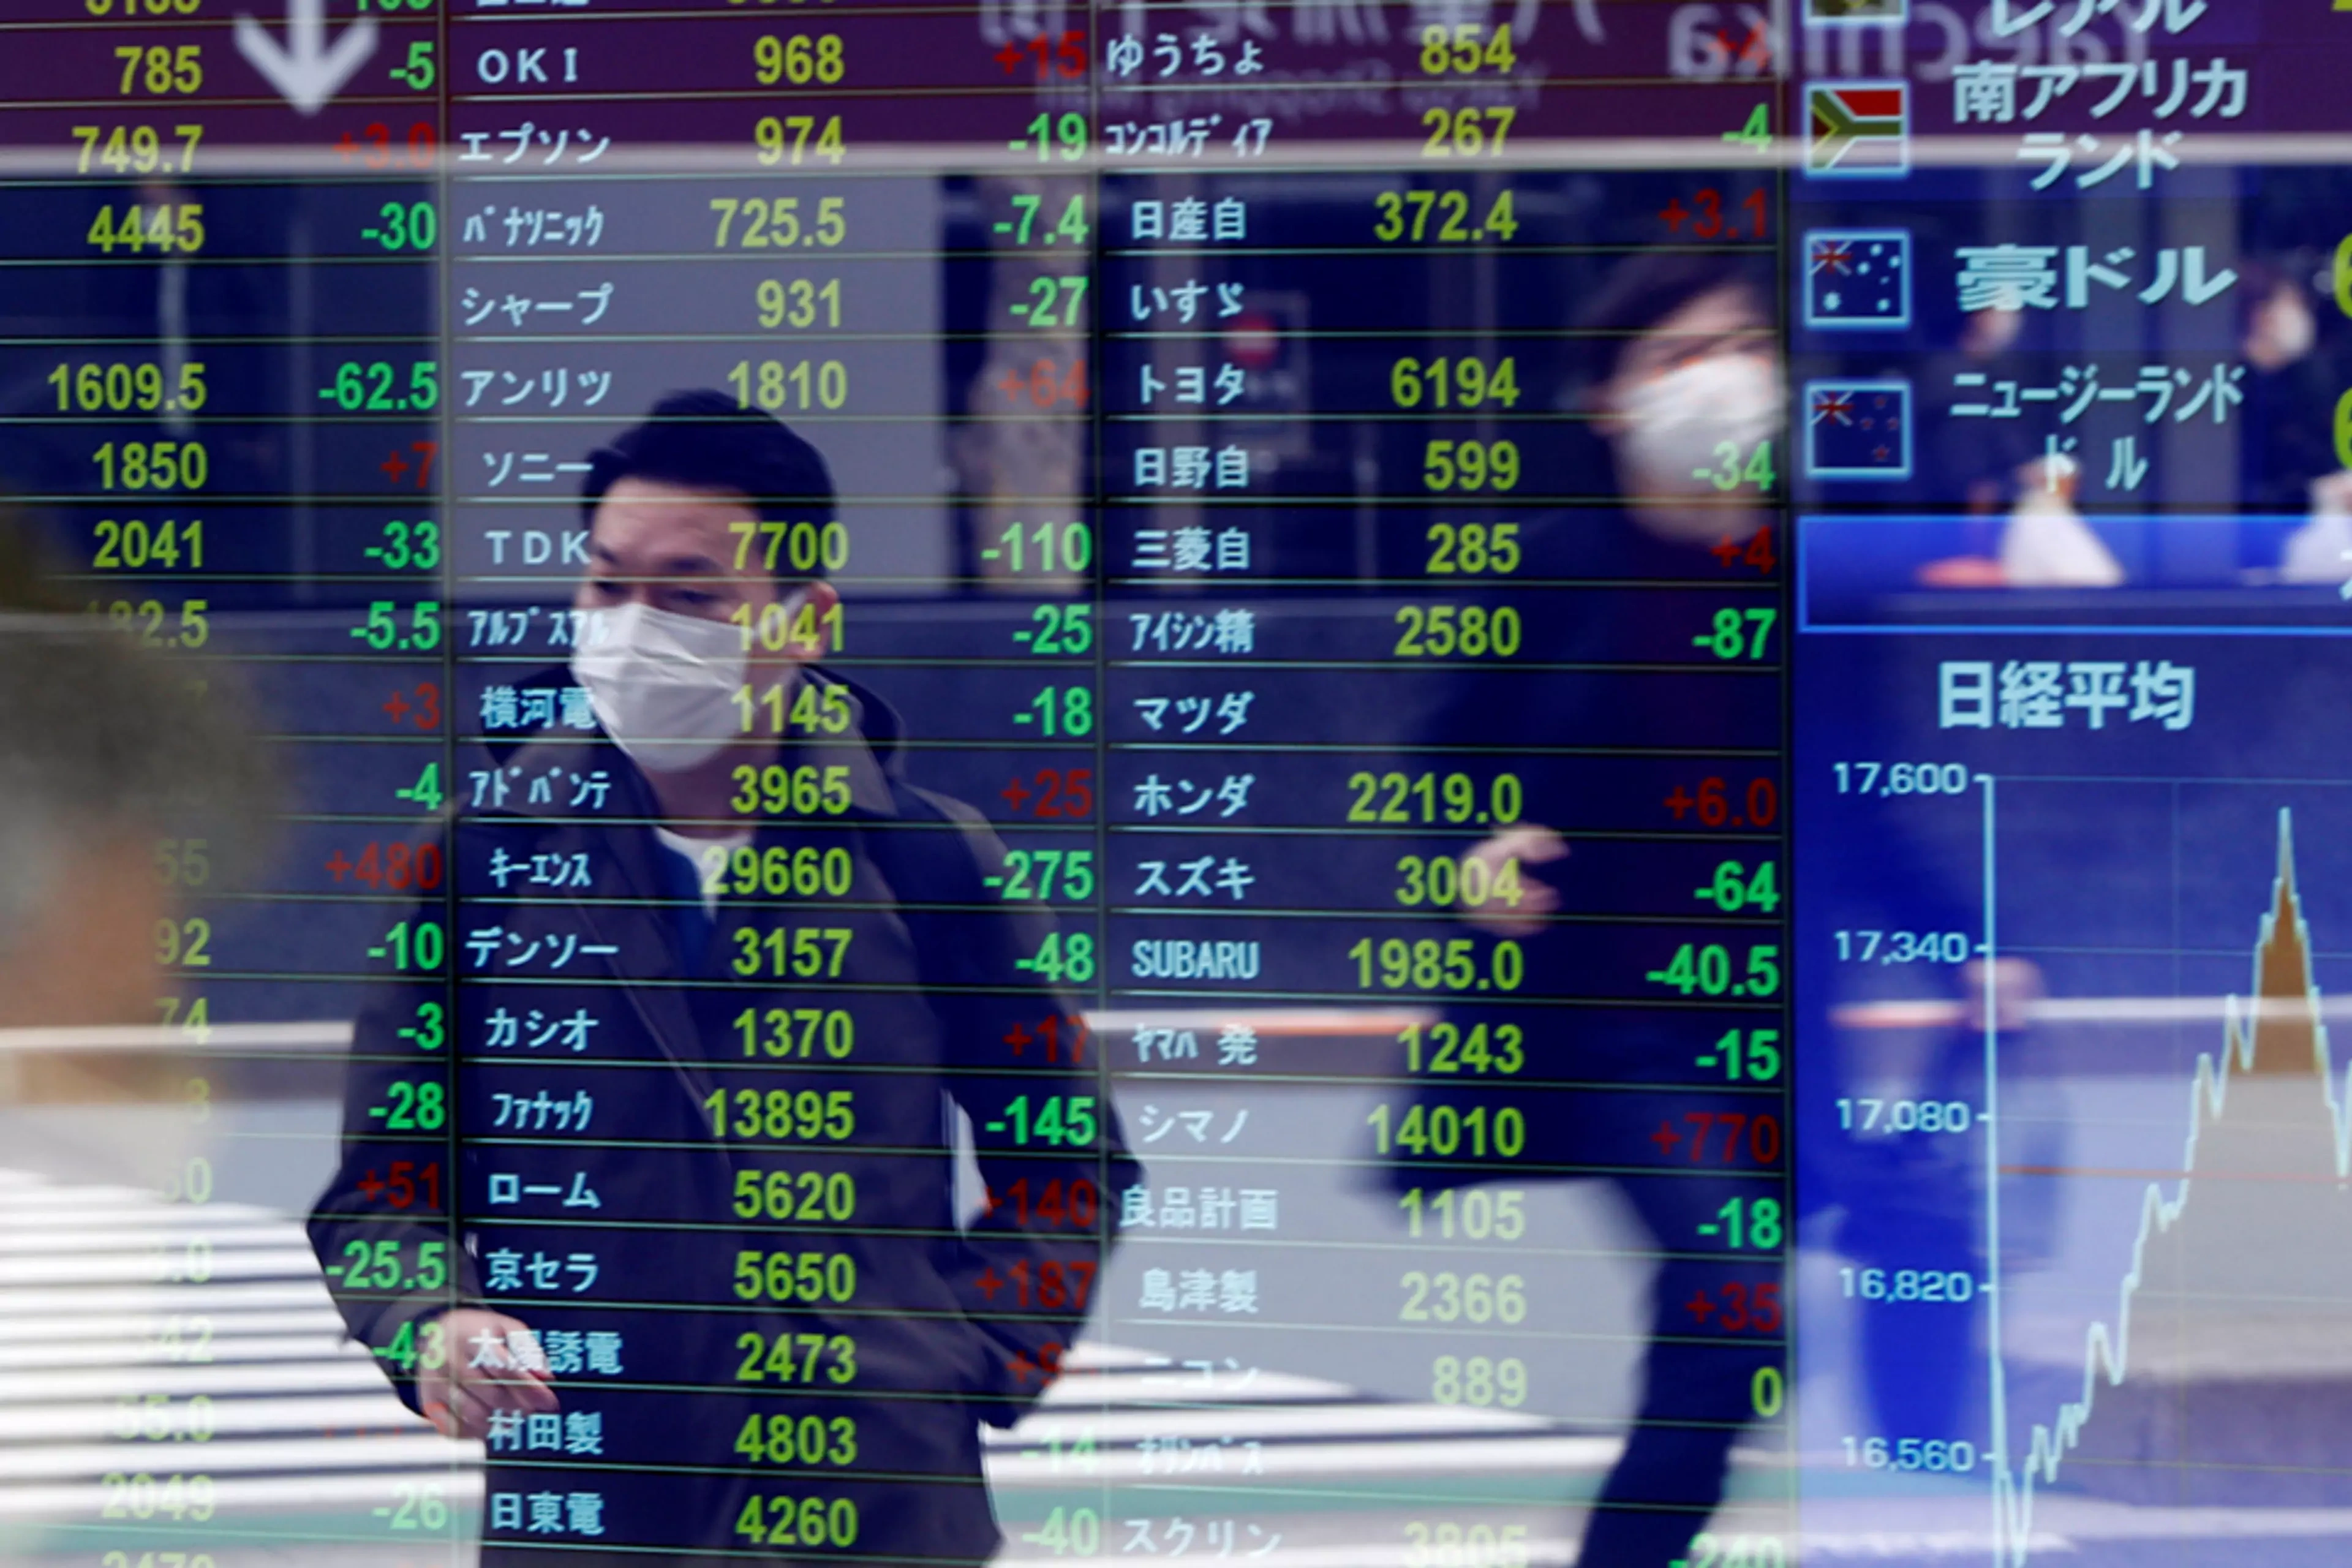 A man wearing a mask amid the coronavirus outbreak is reflected on a screen showing stock prices in Tokyo.